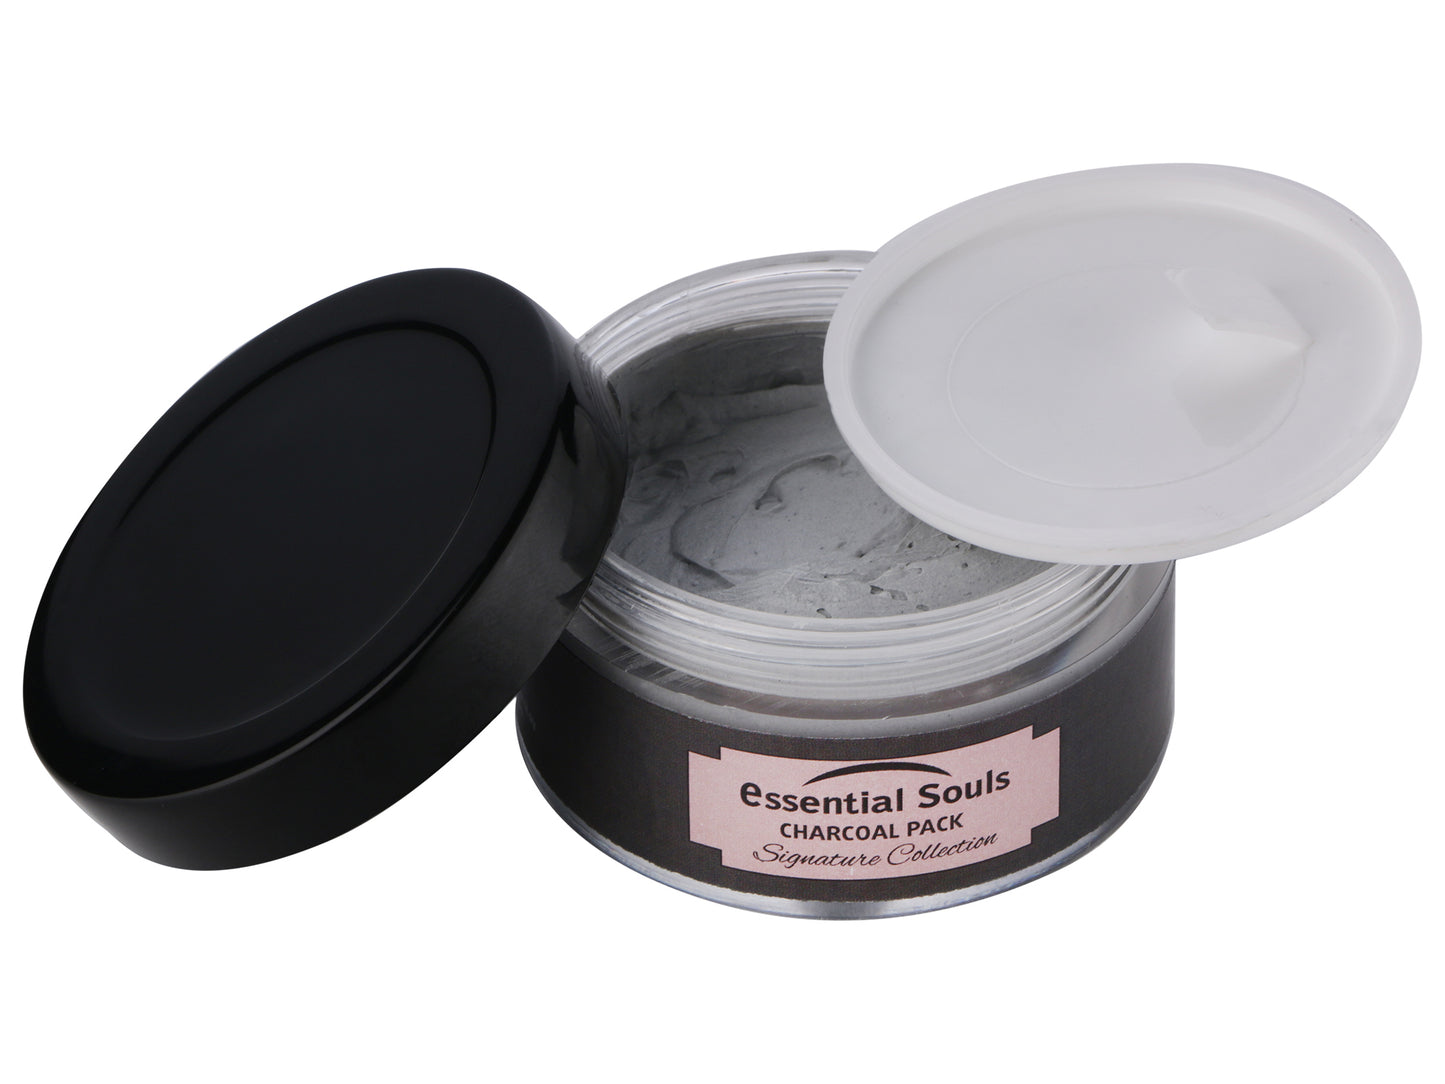 Essential Souls Charcoal Pack - 50g